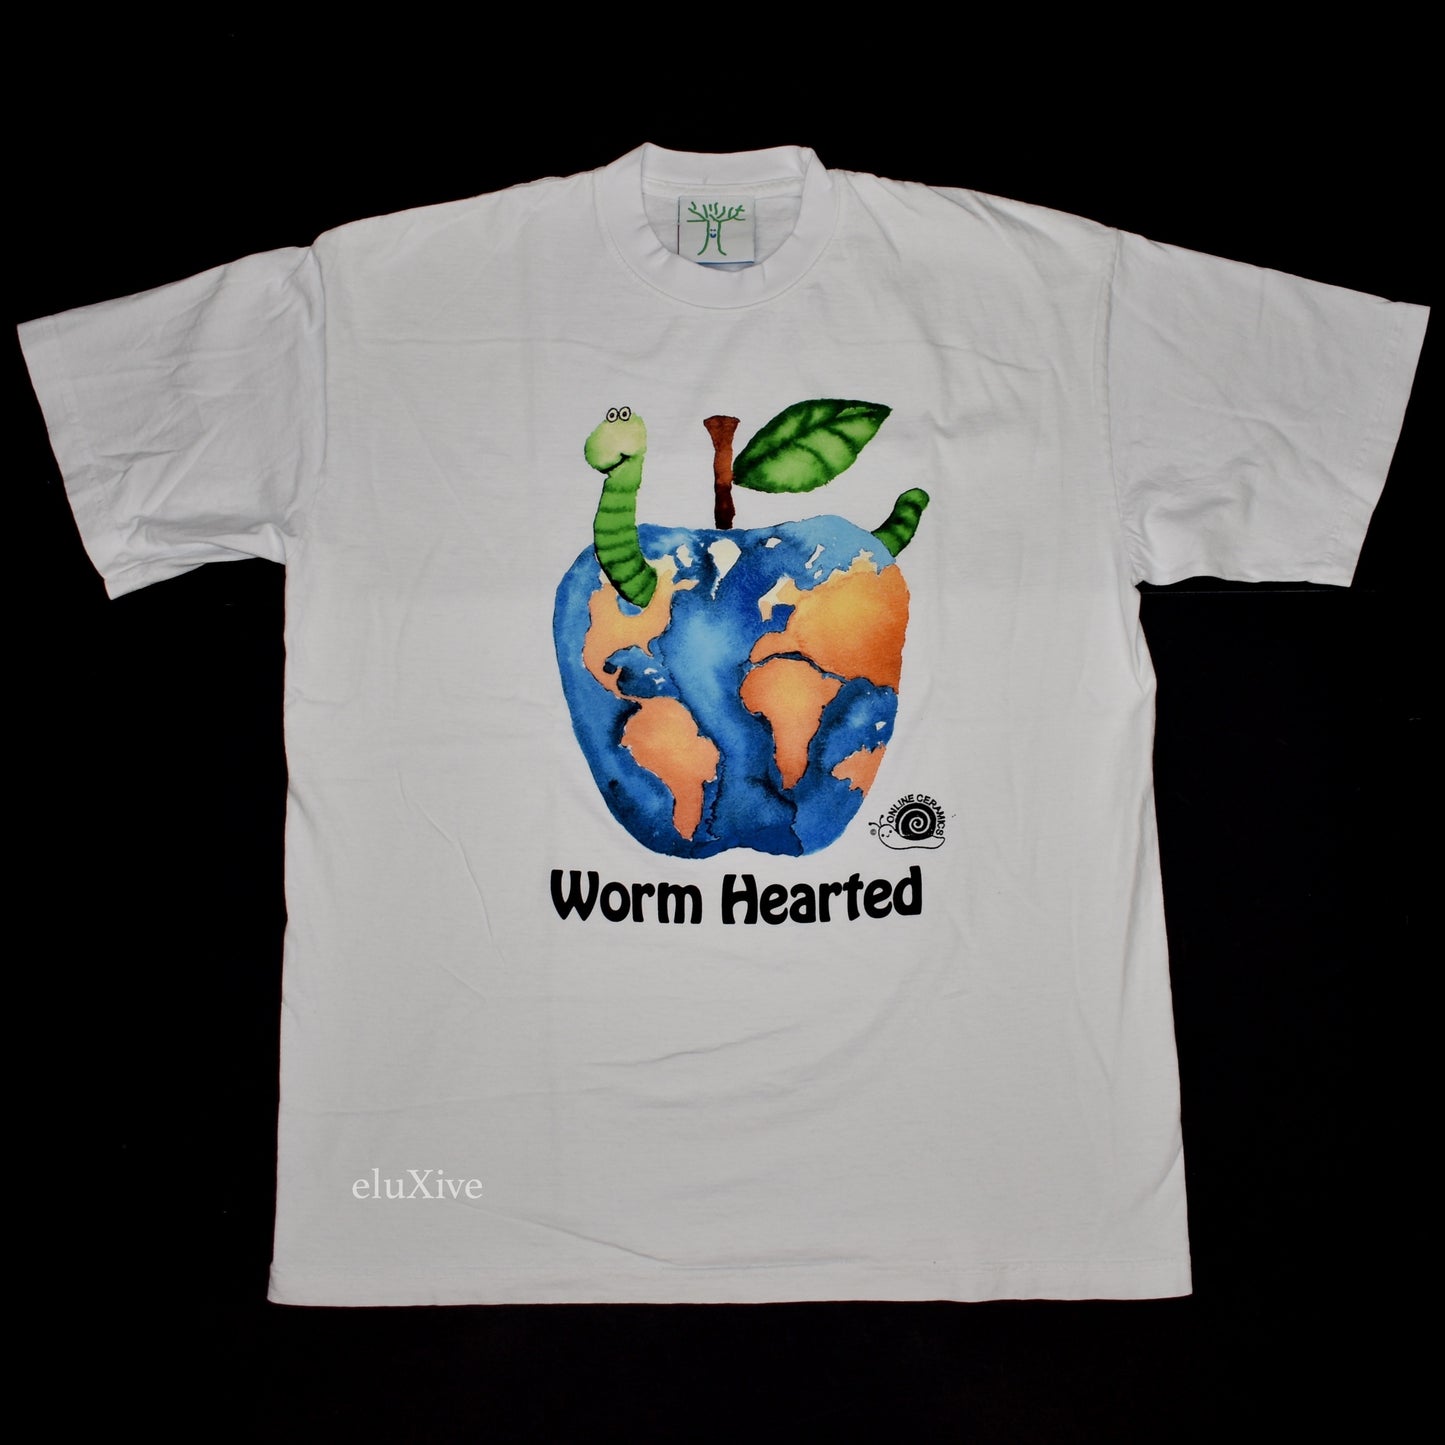 Online Ceramics - White Worm Hearted T-Shirt